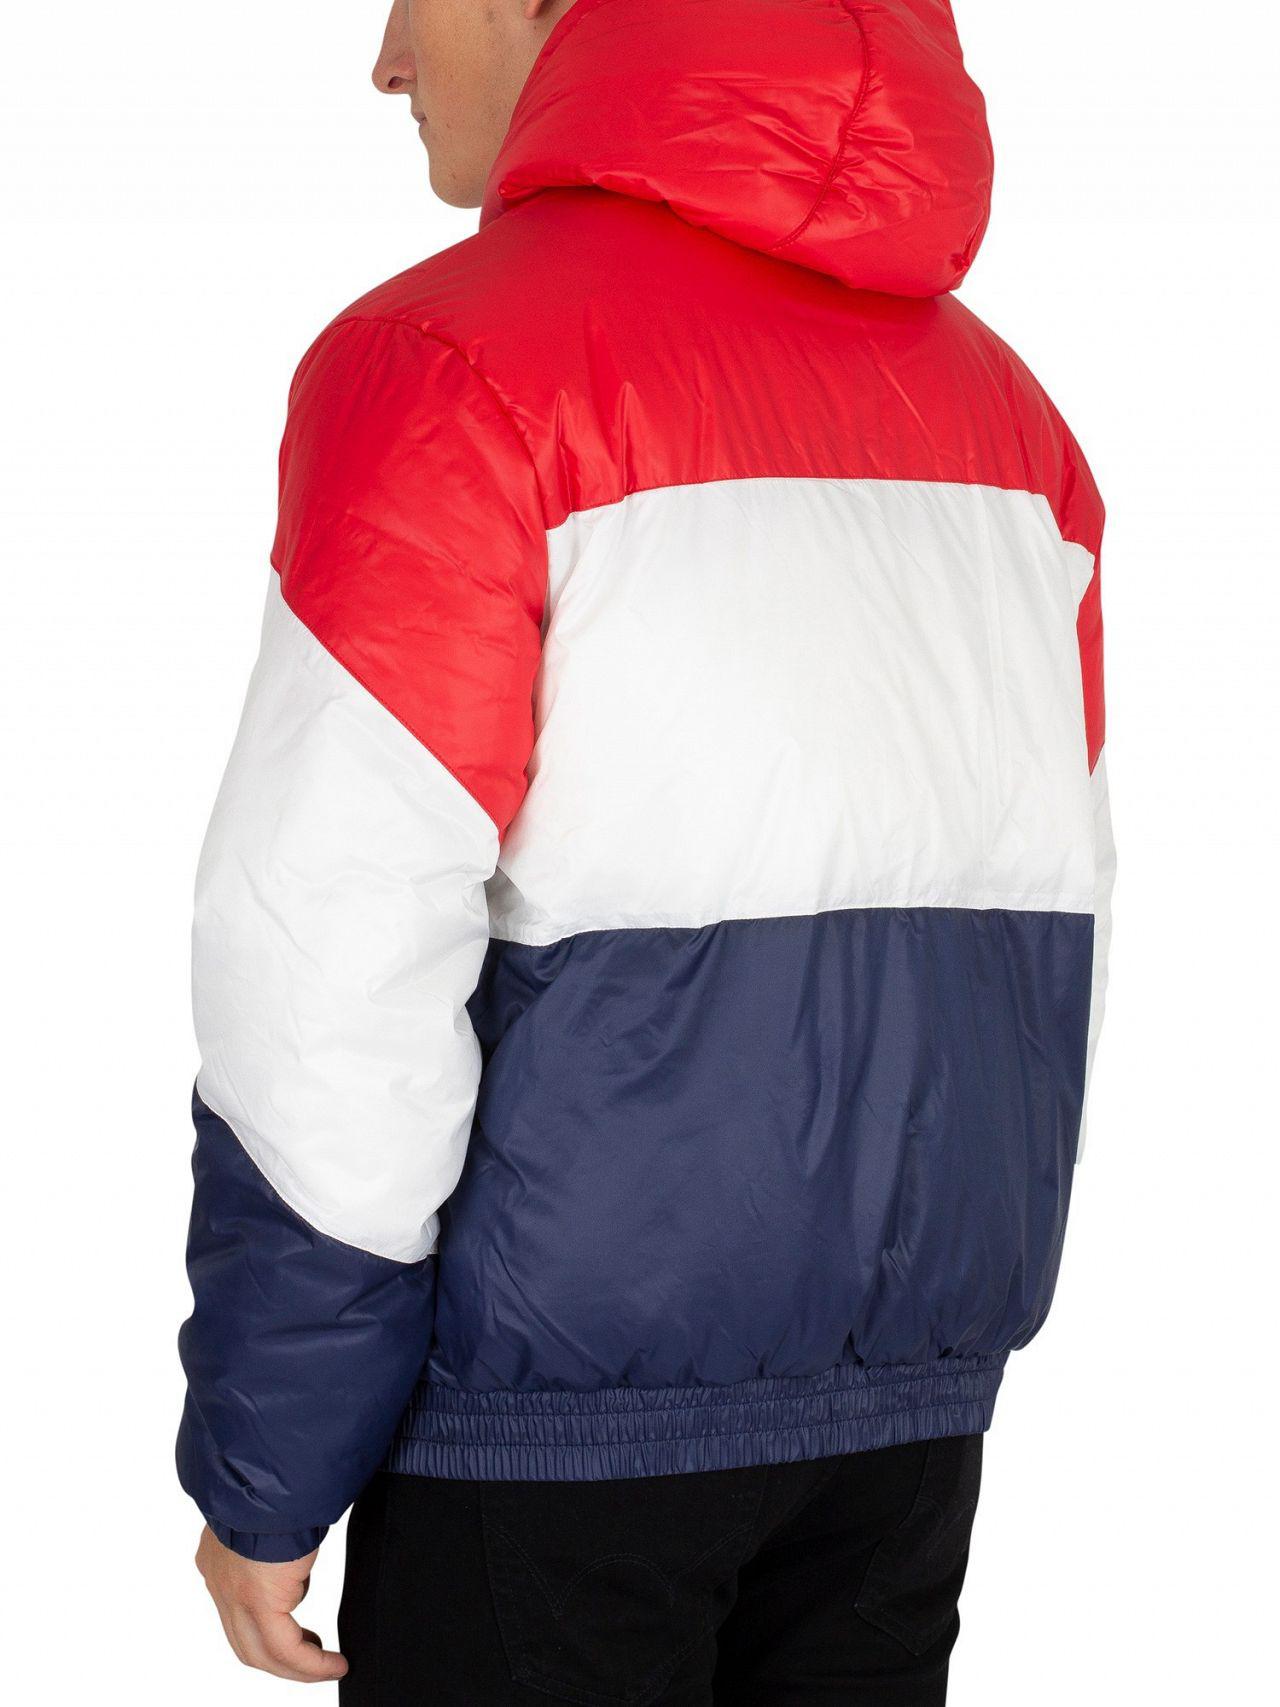 red white and blue fila jacket